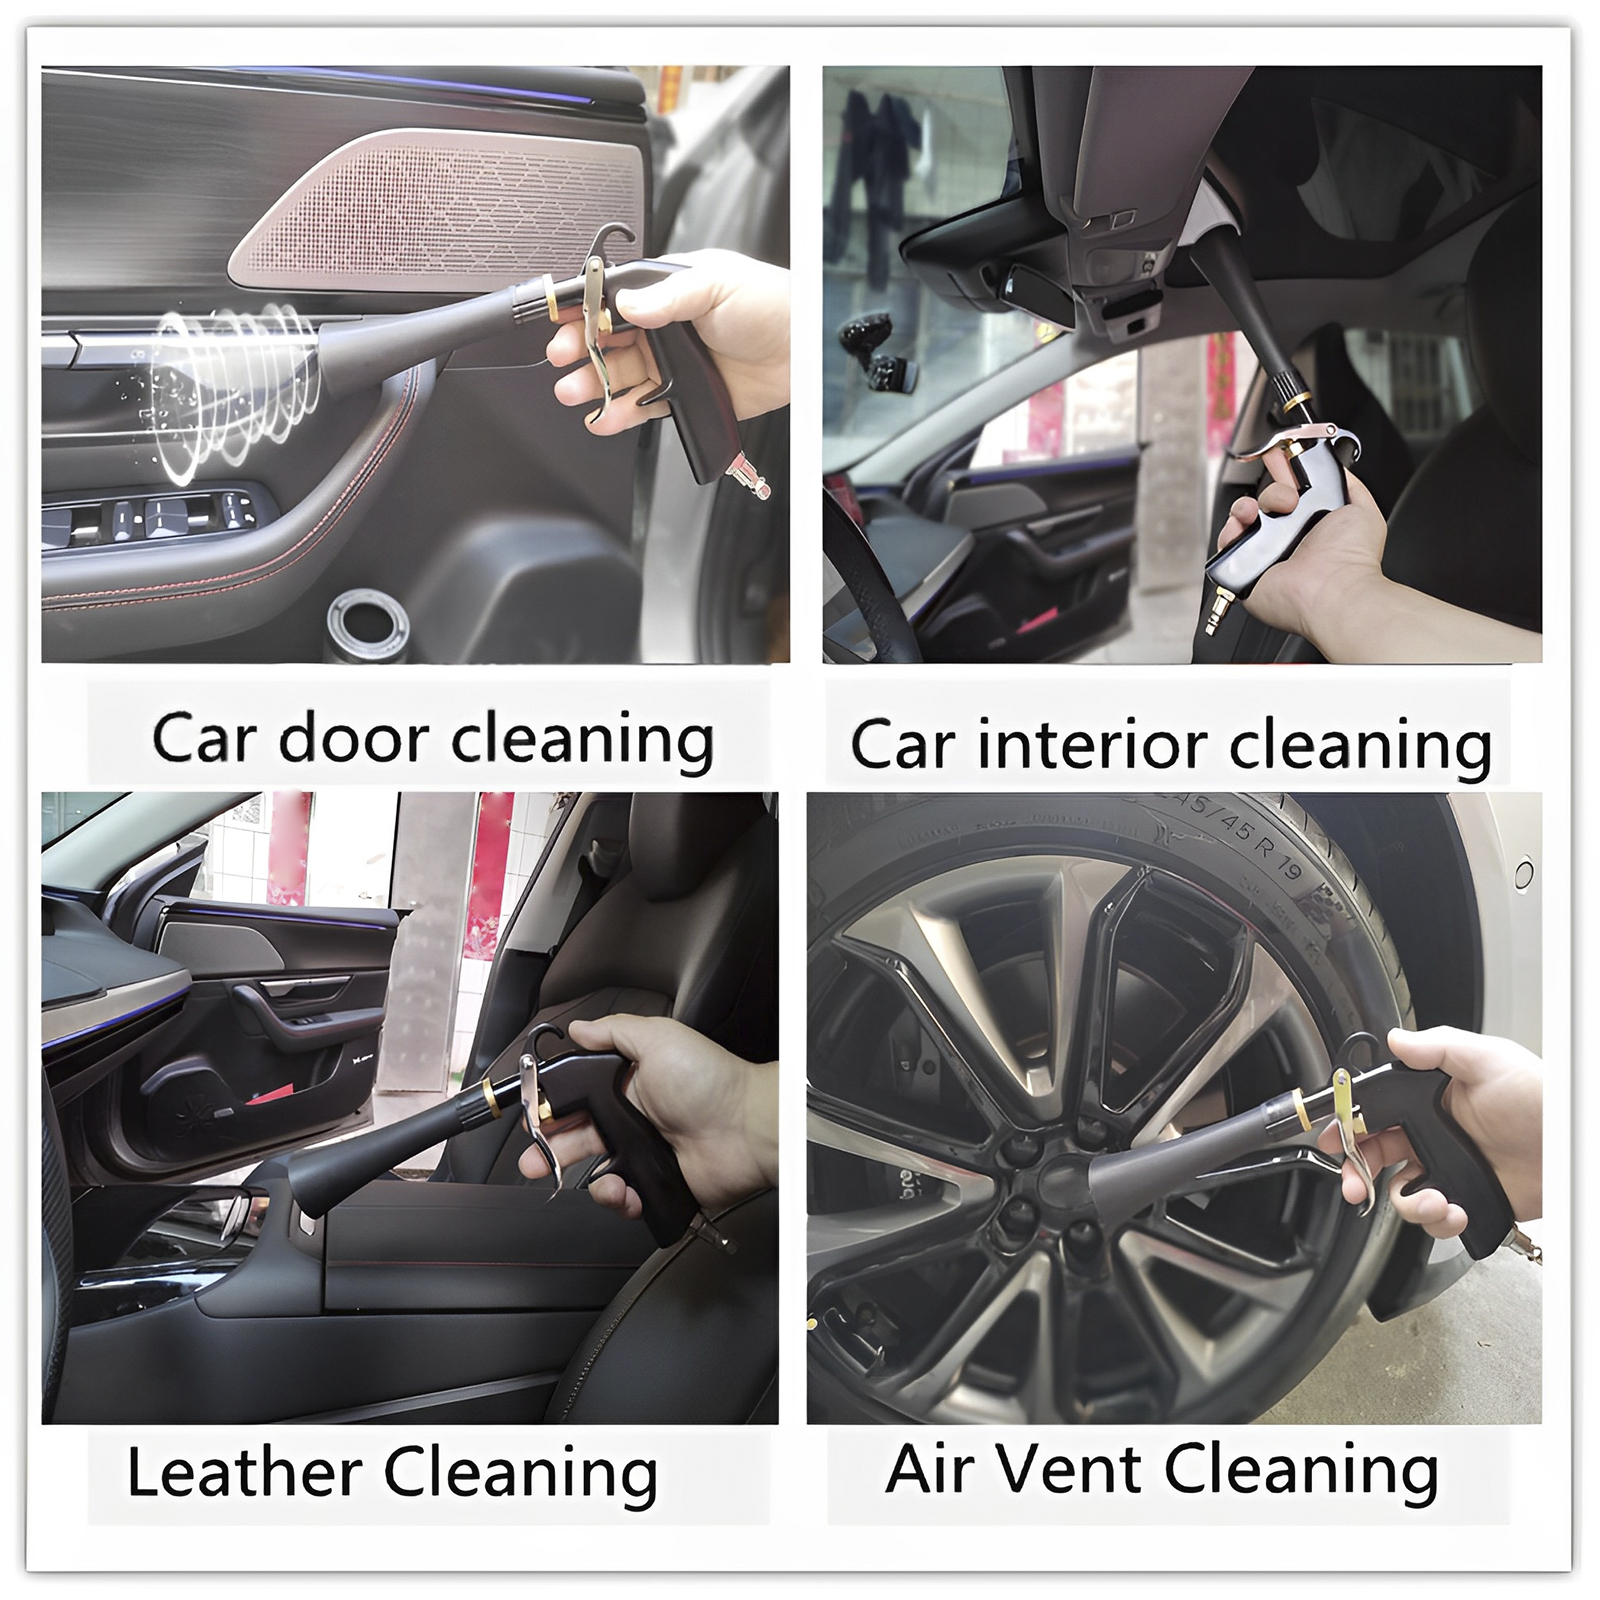 Welpettie Car Interior Cleaner, Auto Detail Tools Car Detailing Kit High Pressure Car Cleaning Gun Car Cleaning Kit for Vehicle Upholstery Carpet Seat